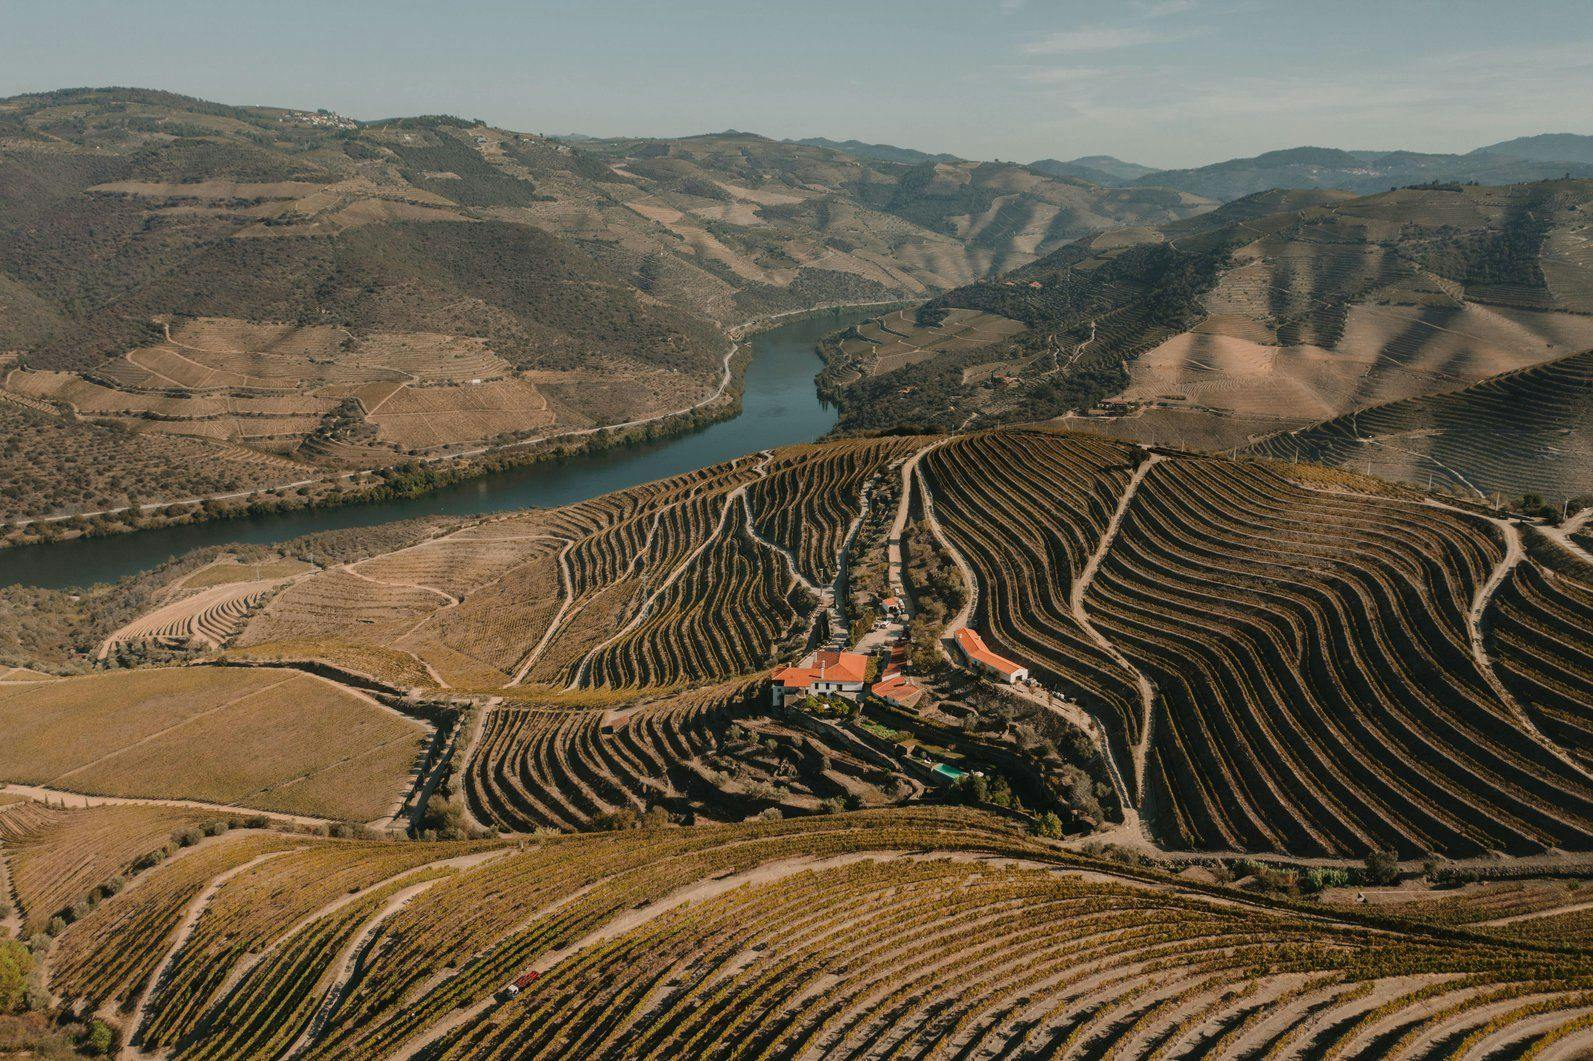 the view of douro valley